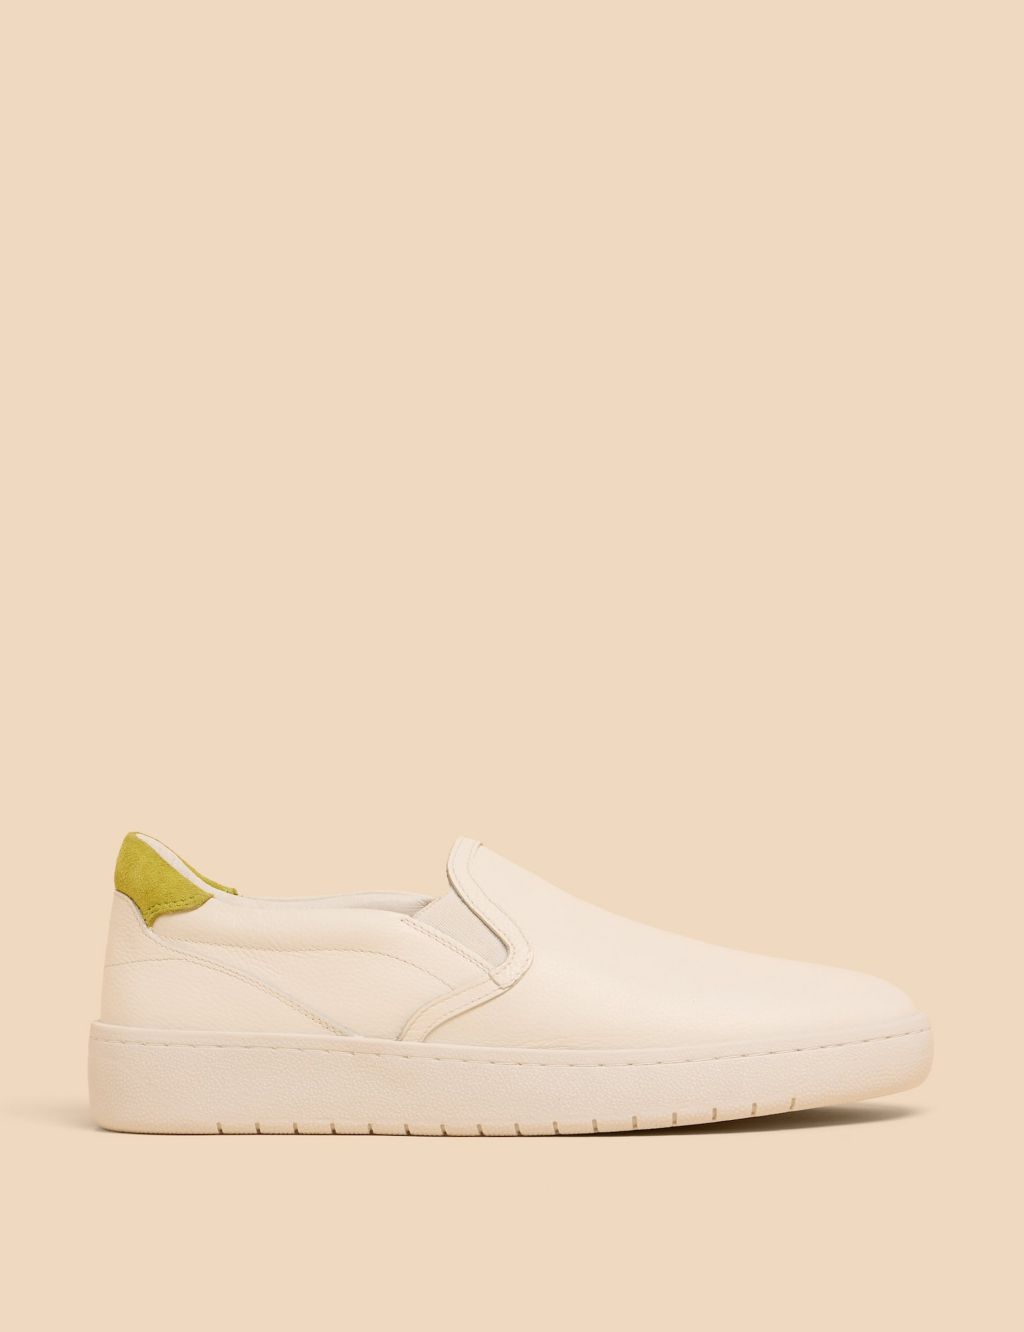 Leather Slip On Trainers image 1